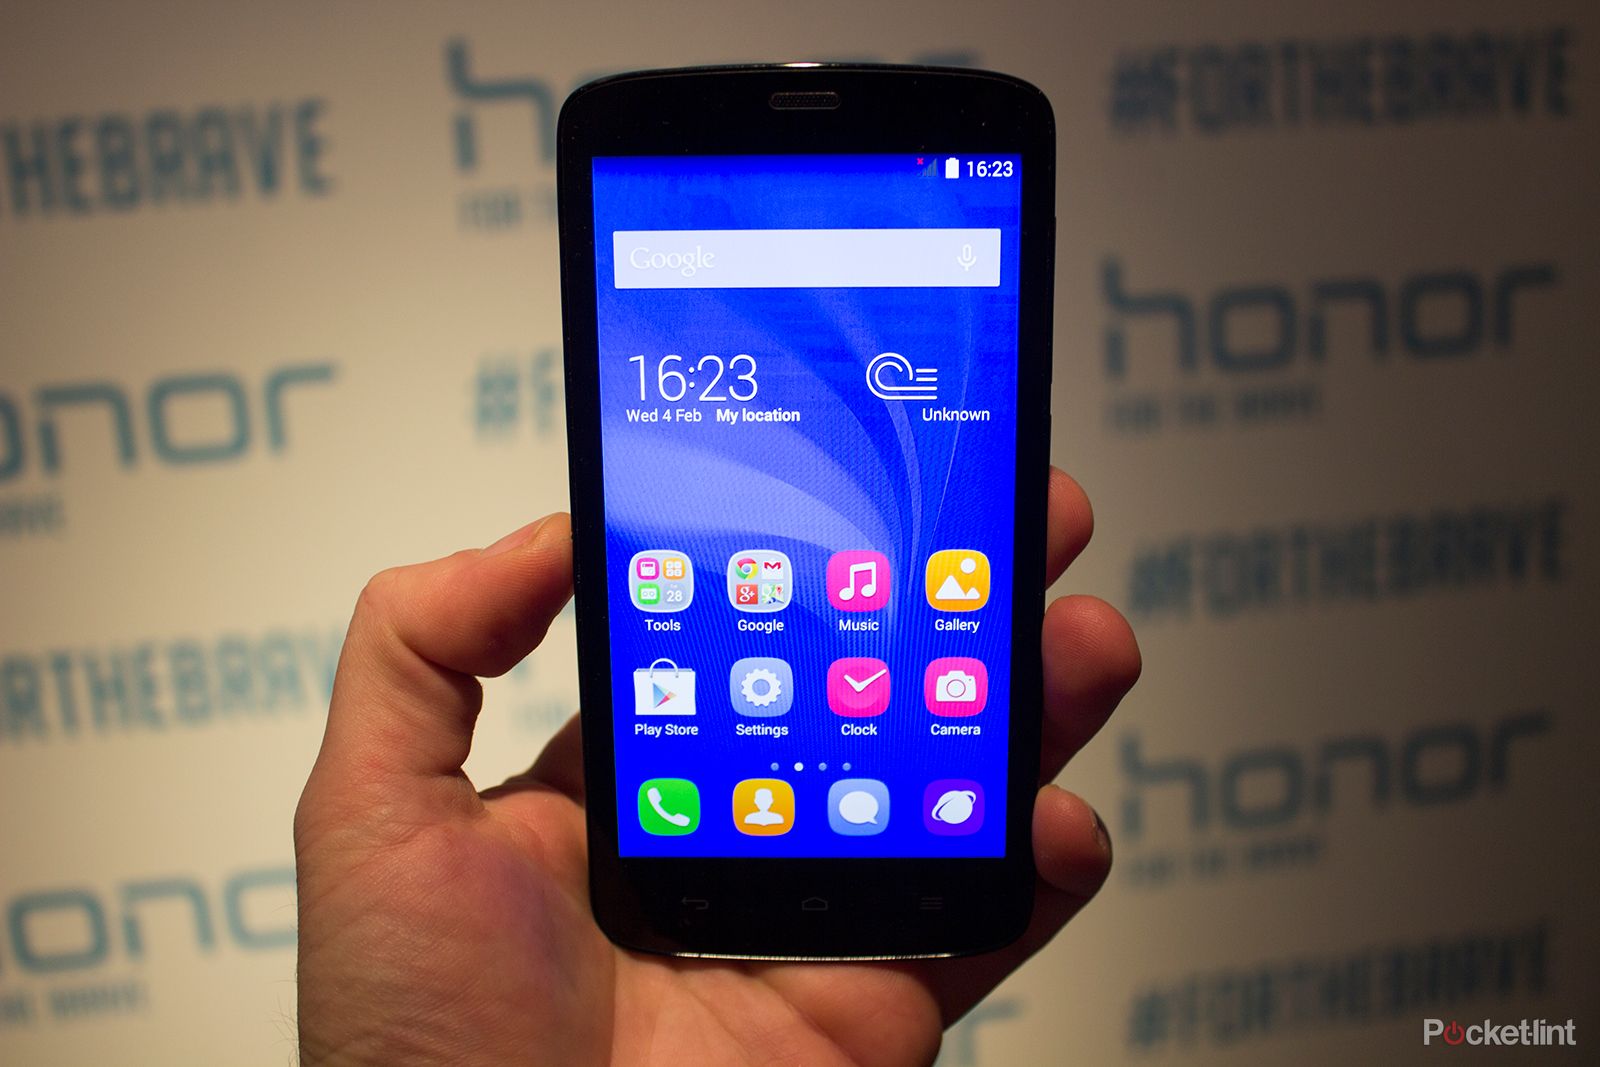 honor holly decent specs for under 100 hands on  image 1